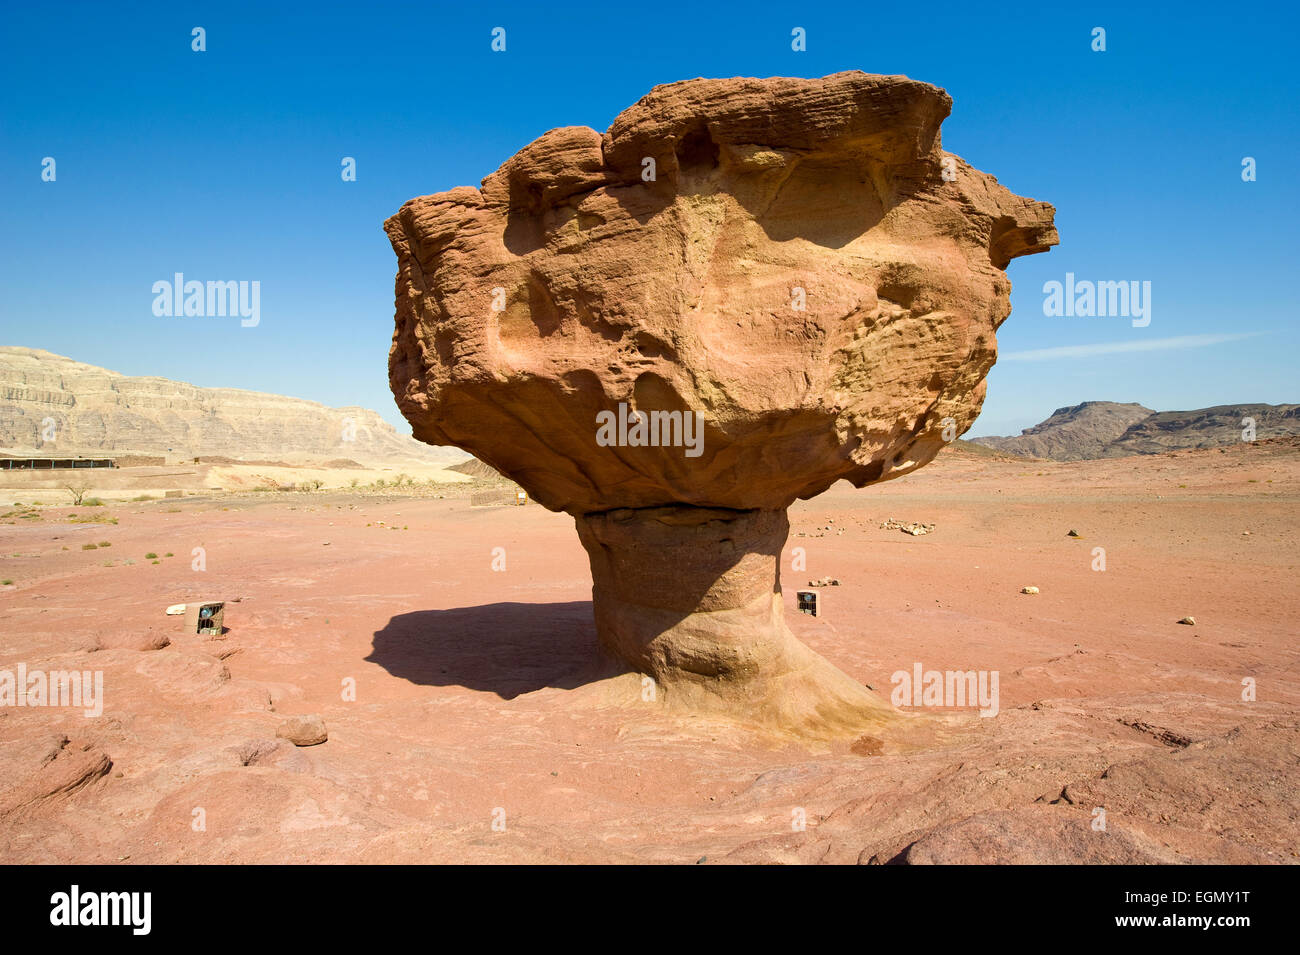 'The Mushroom' rock formation at Timna Park in the southern negev desert in Israel Stock Photo